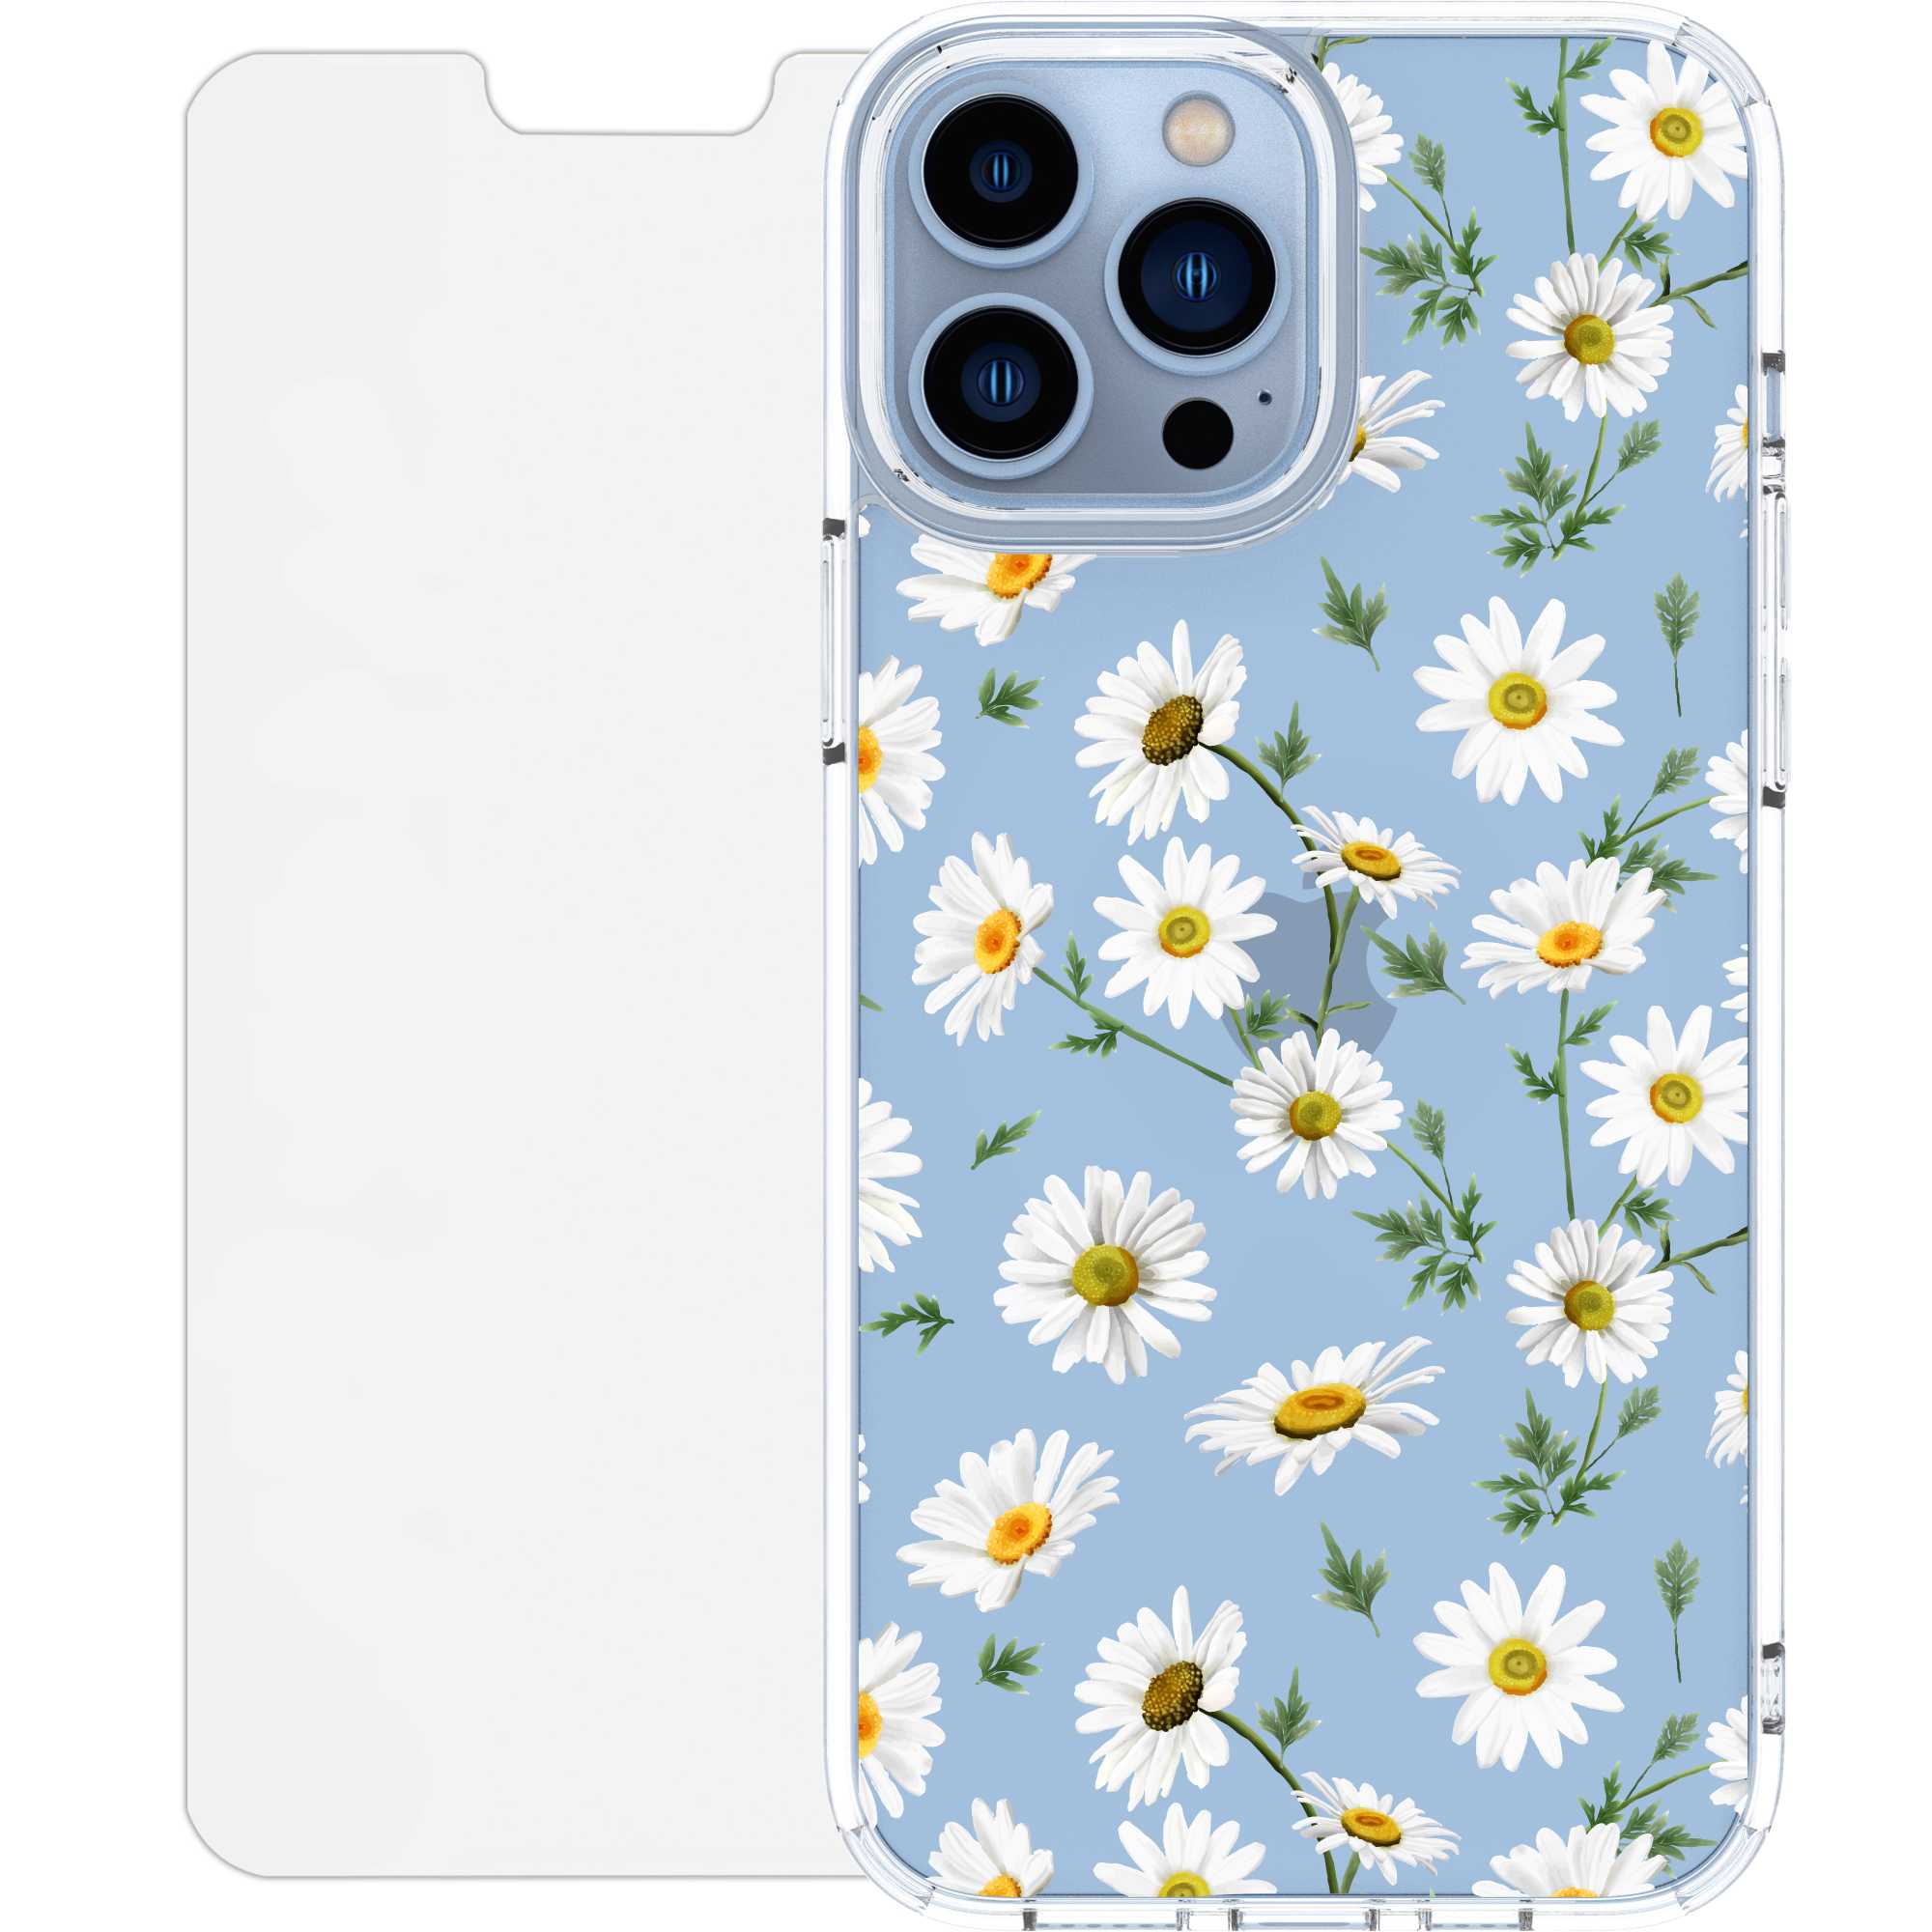 Scooch CrystalCase for iPhone 13 Pro Max Daisies Scooch CrystalCase